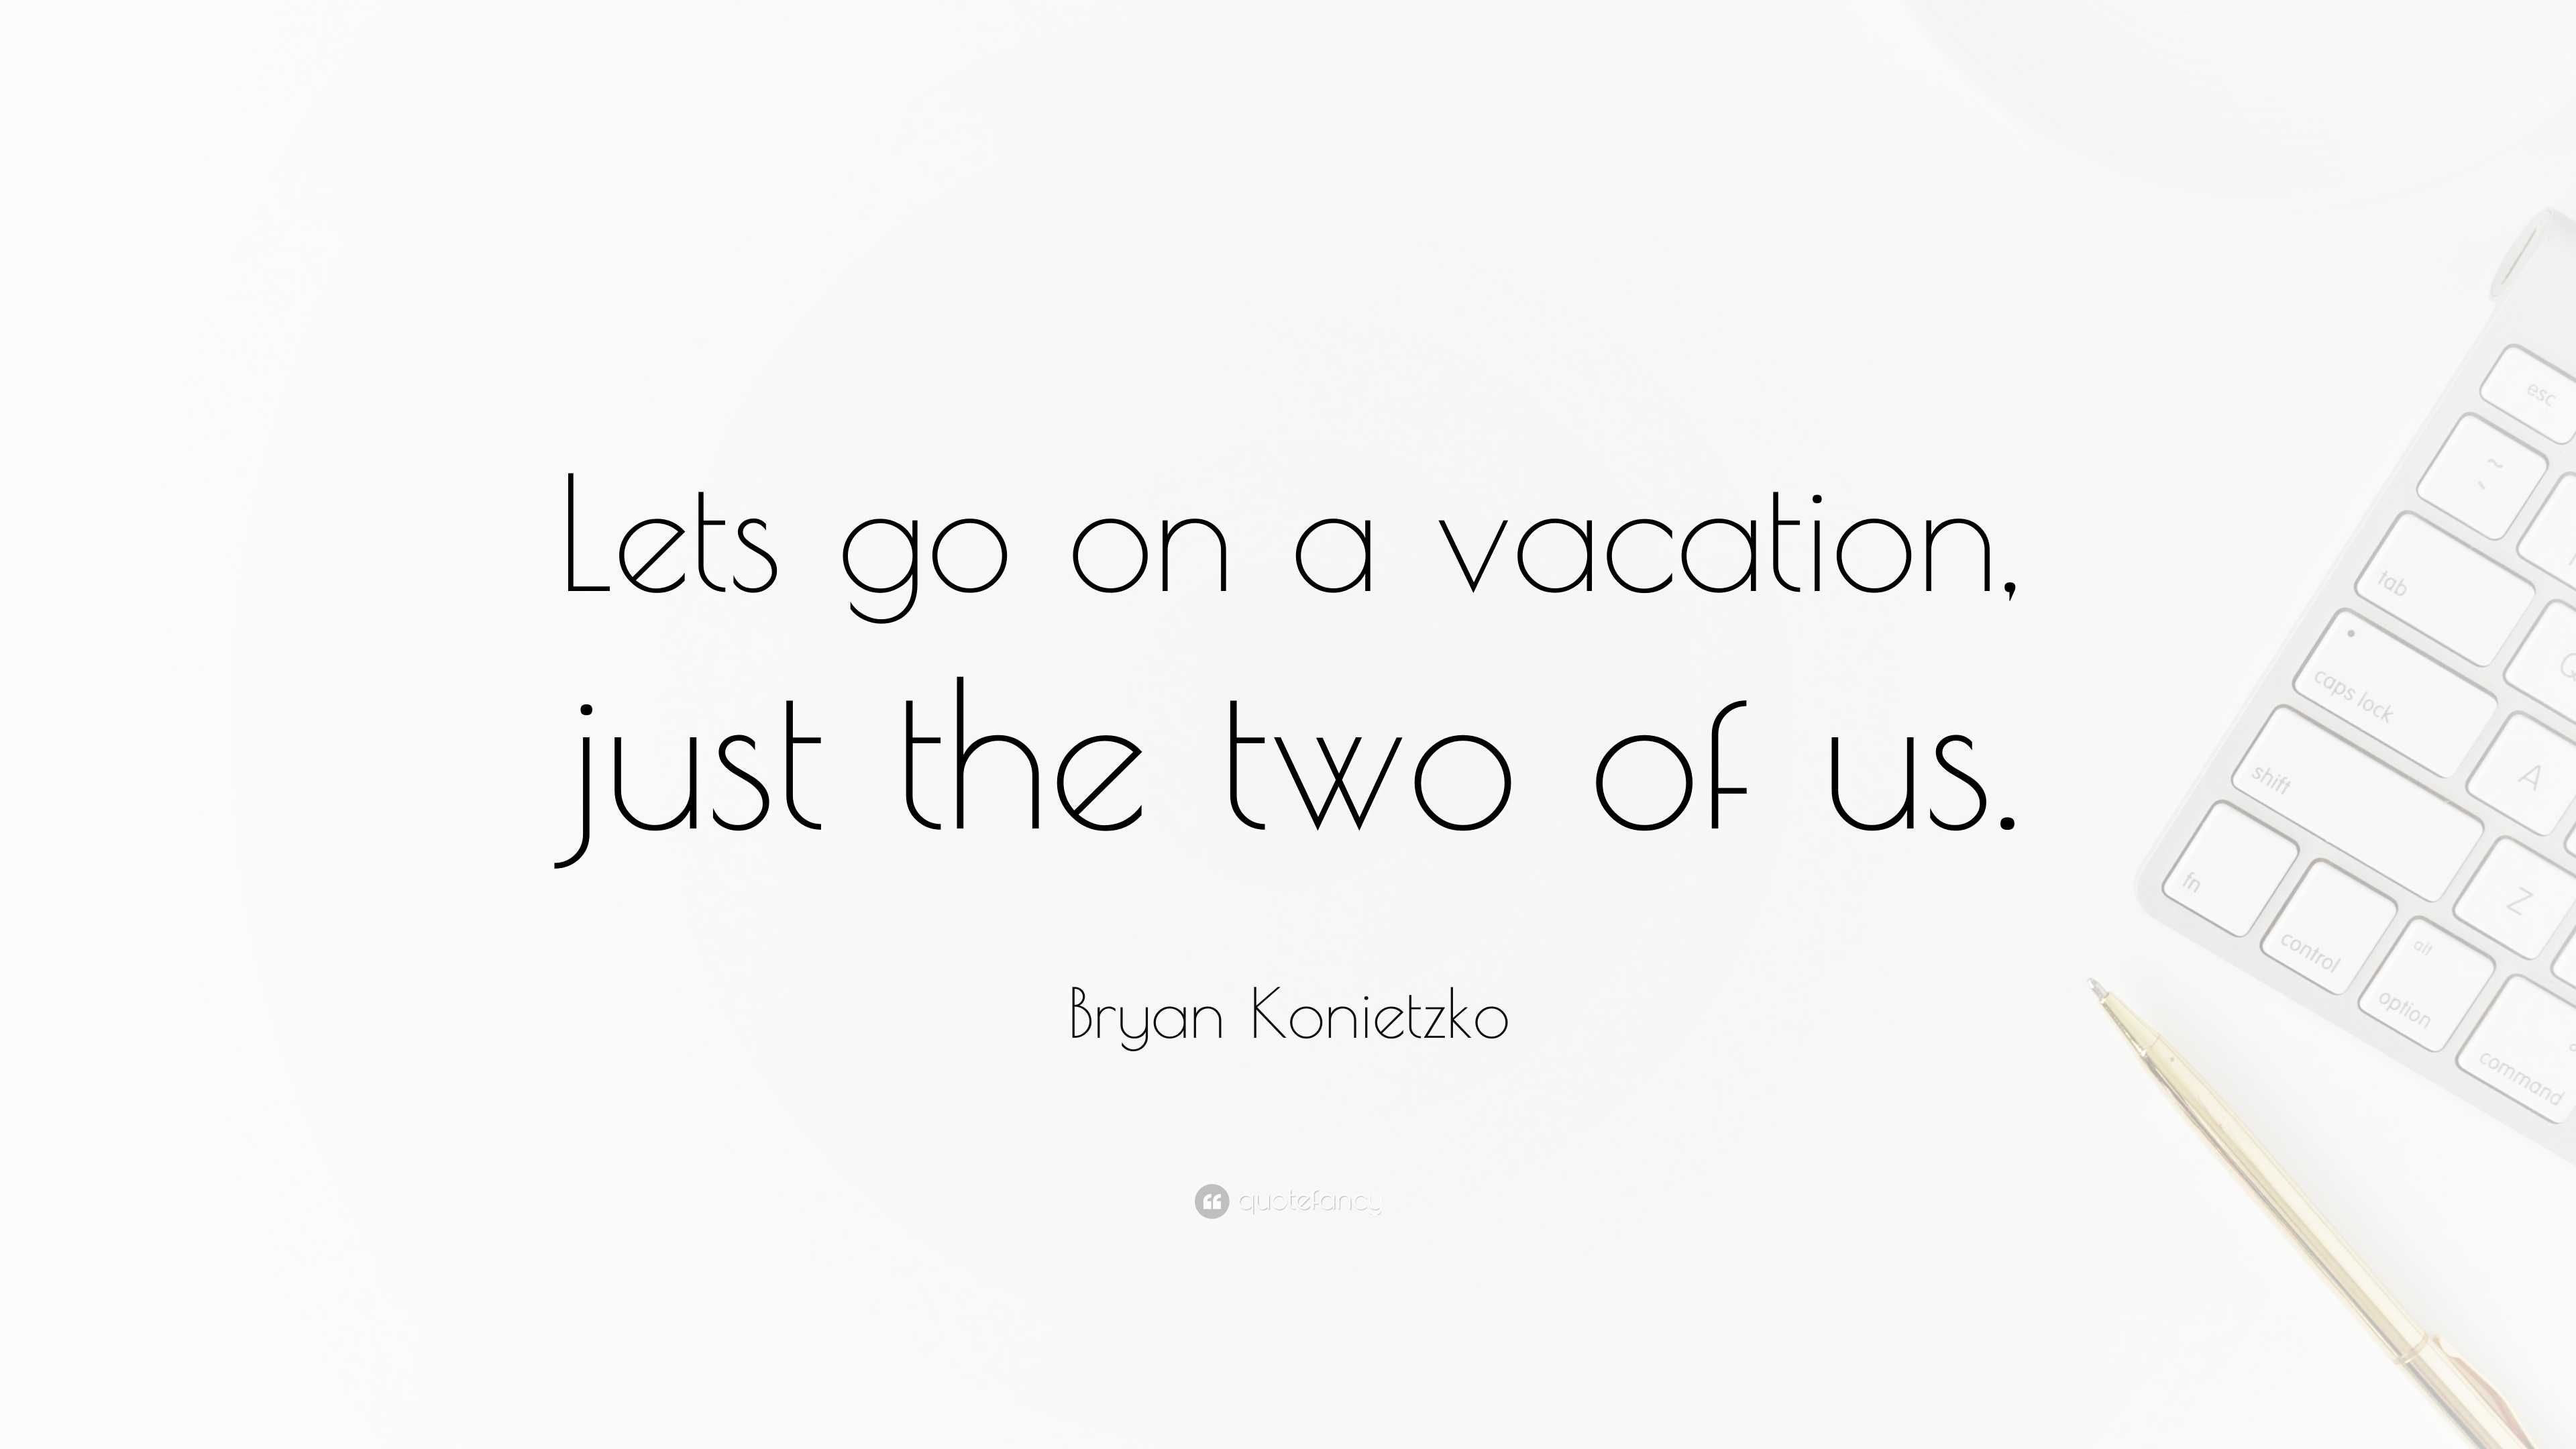 Bryan Konietzko Quote: “Lets go on a vacation, just the two of us.”